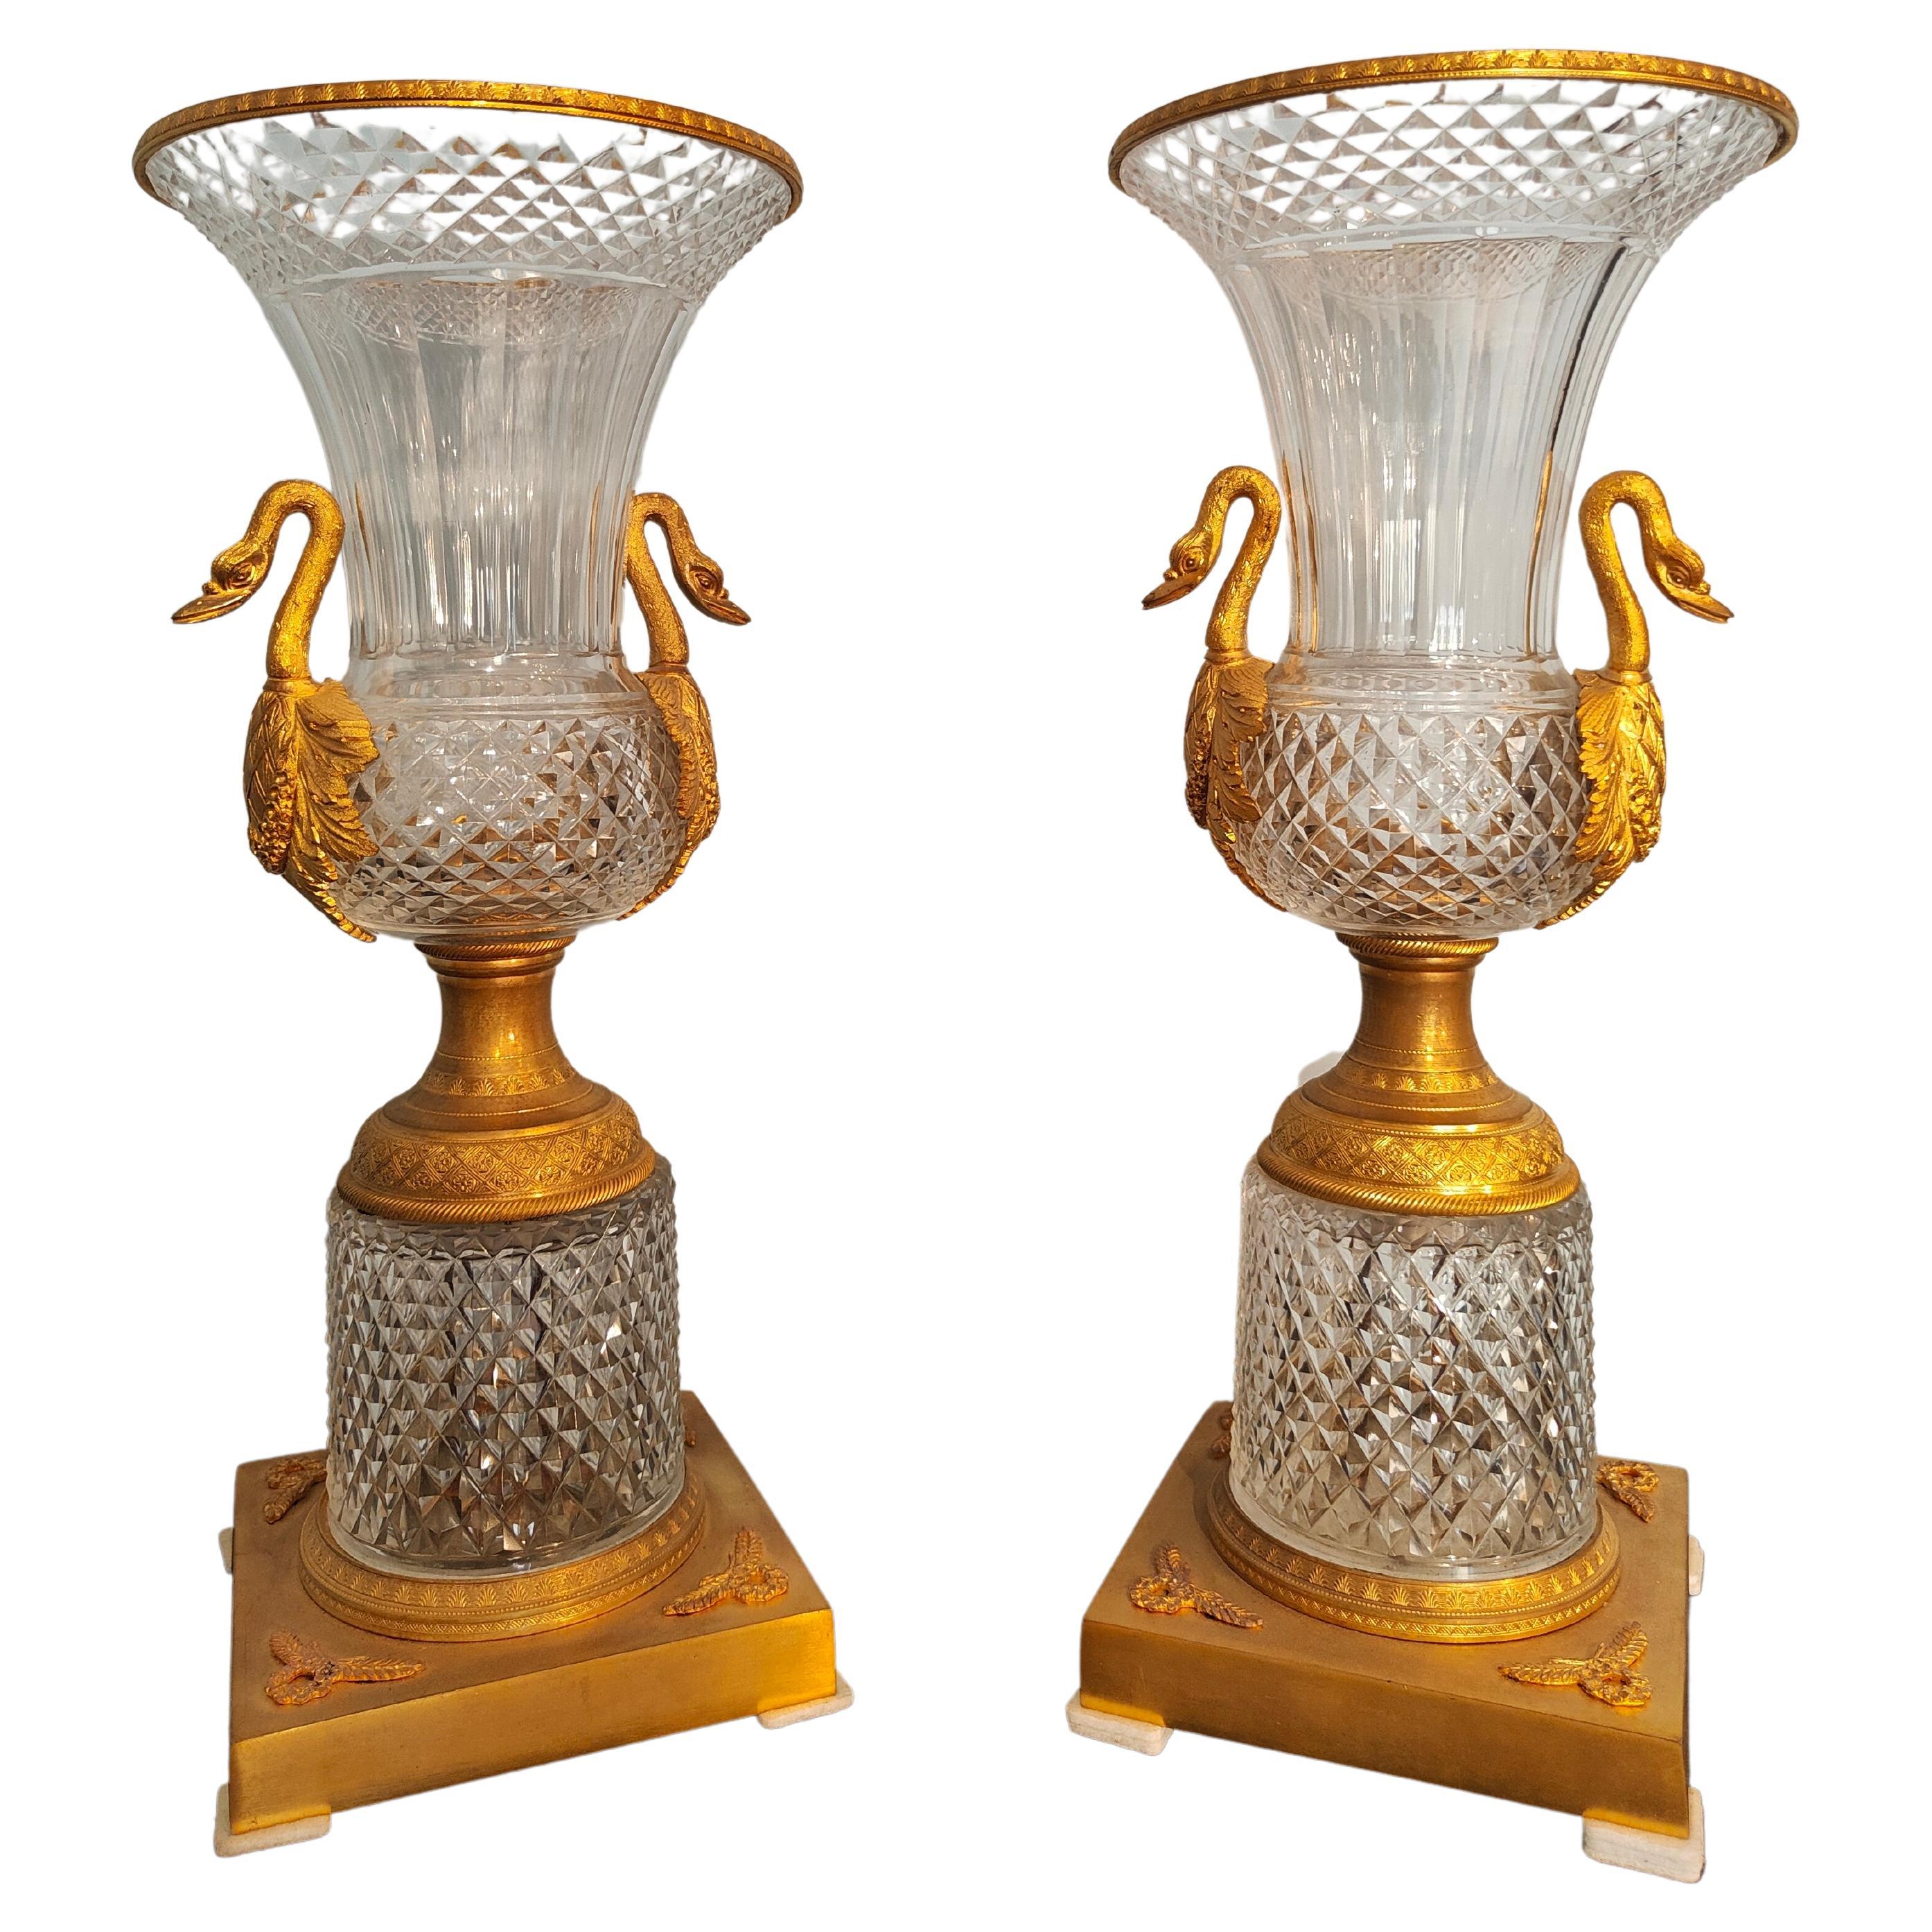 Pair of Crystal and Bronze Empire Period Vases